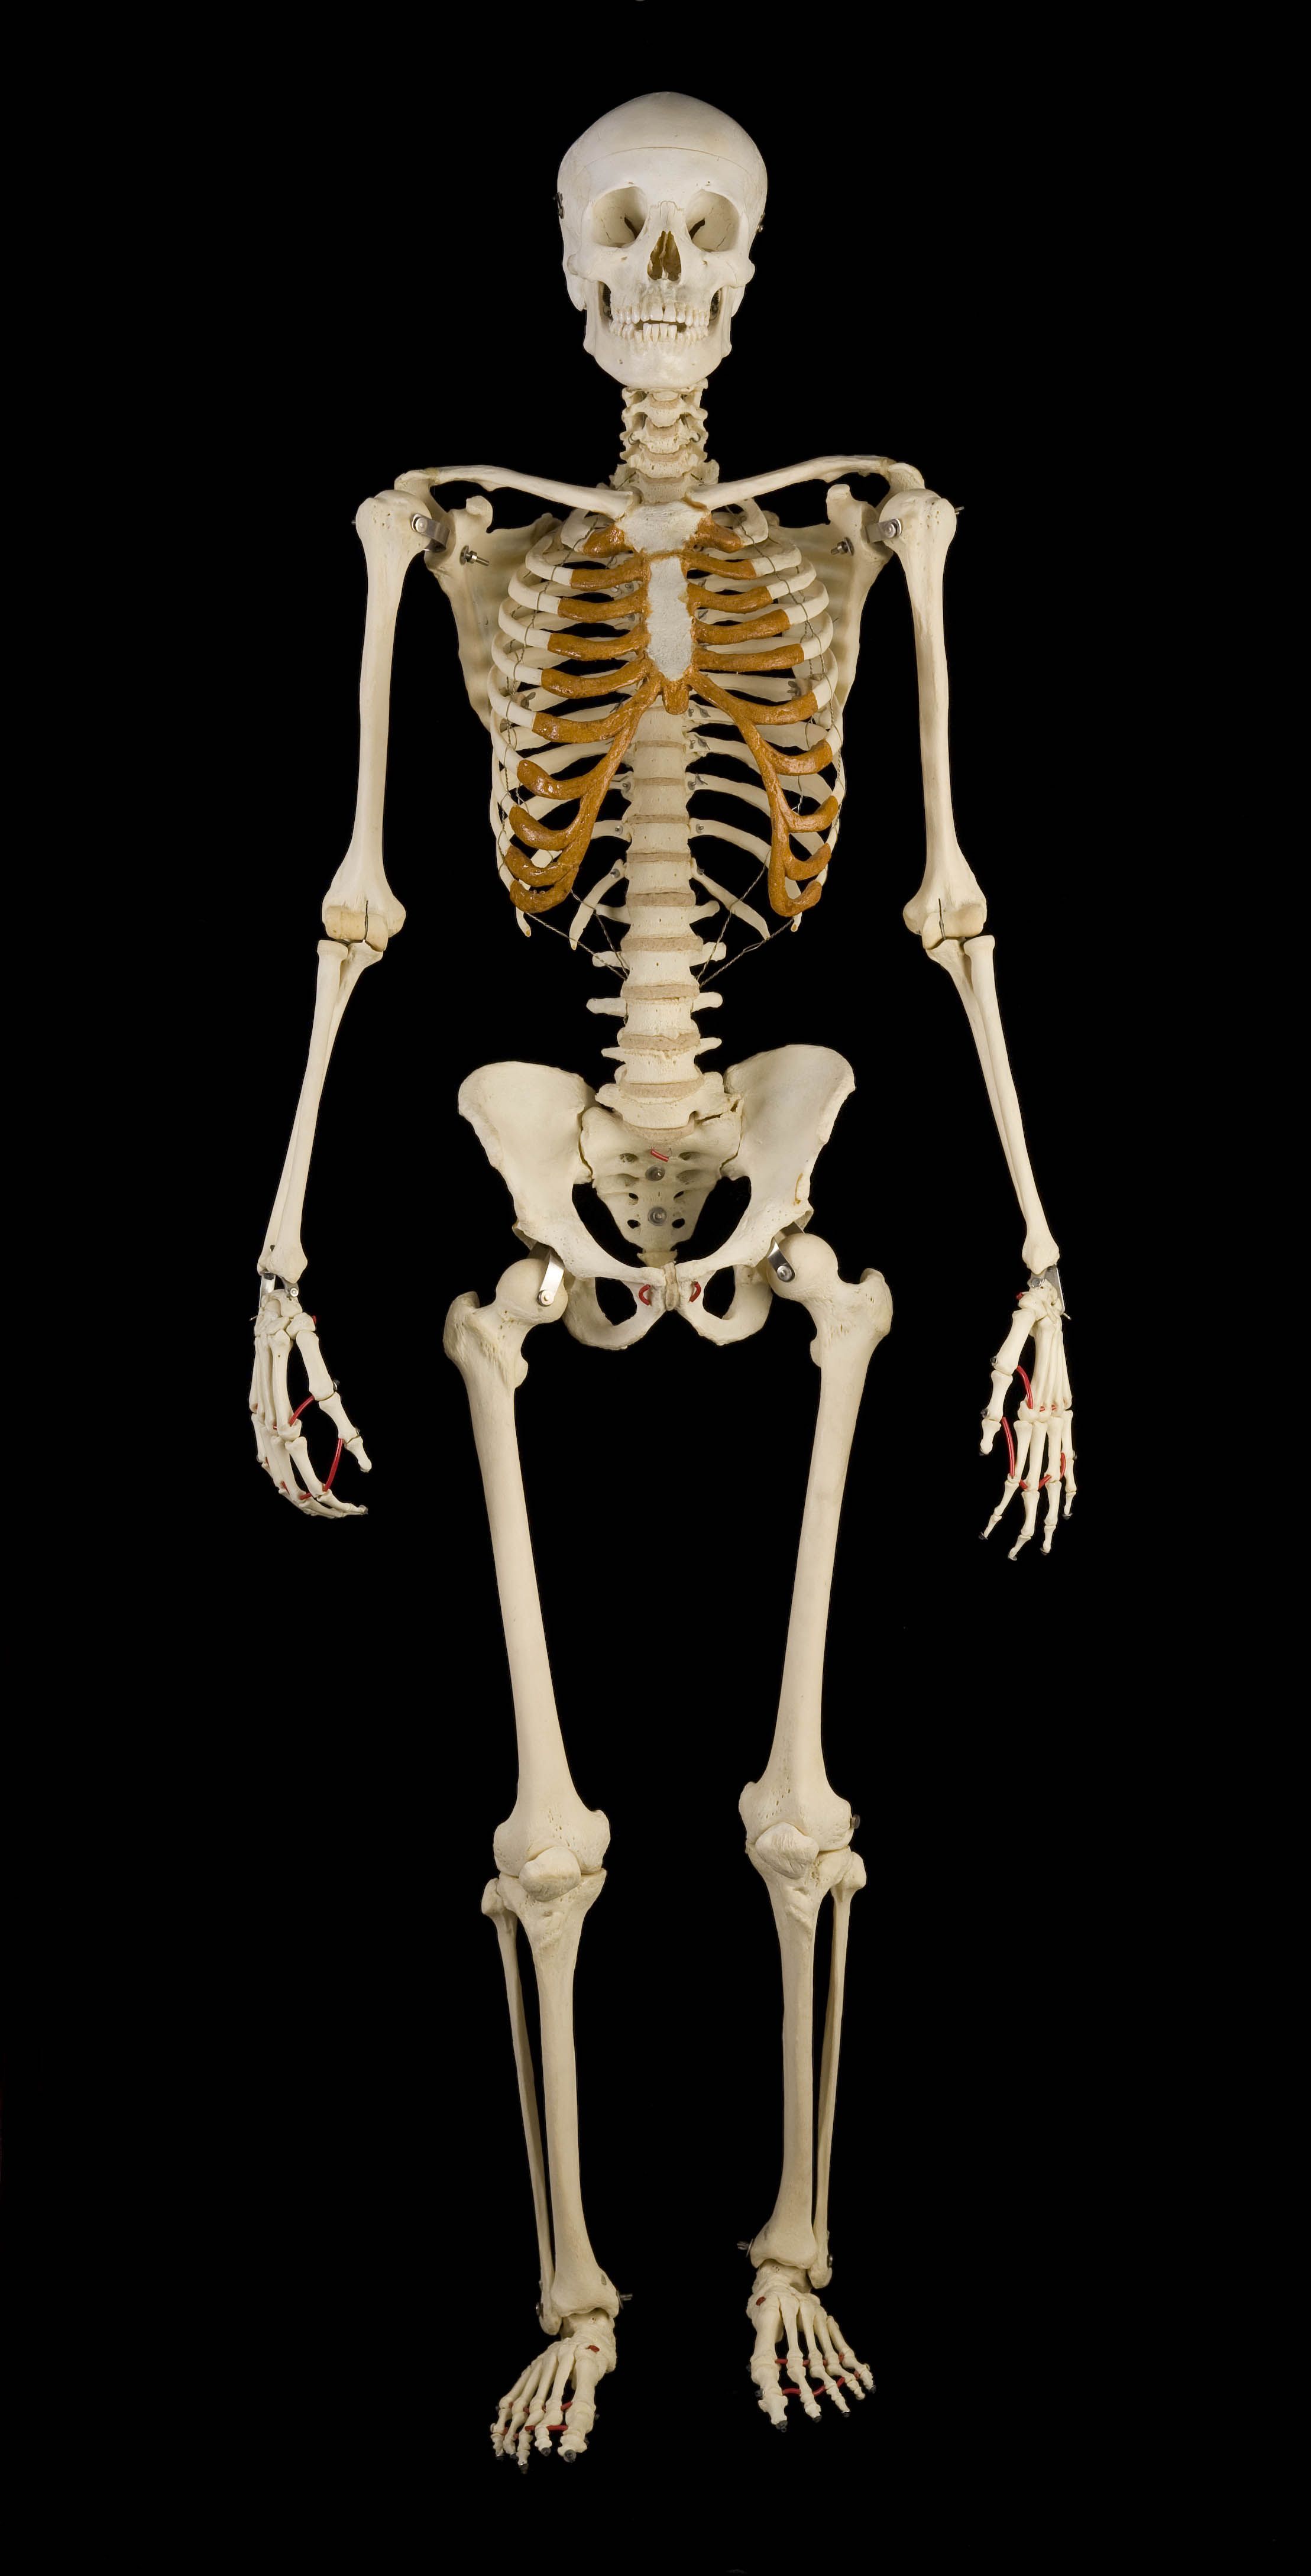 Human Skeleton Full Frontal View Photograph By Steve - vrogue.co